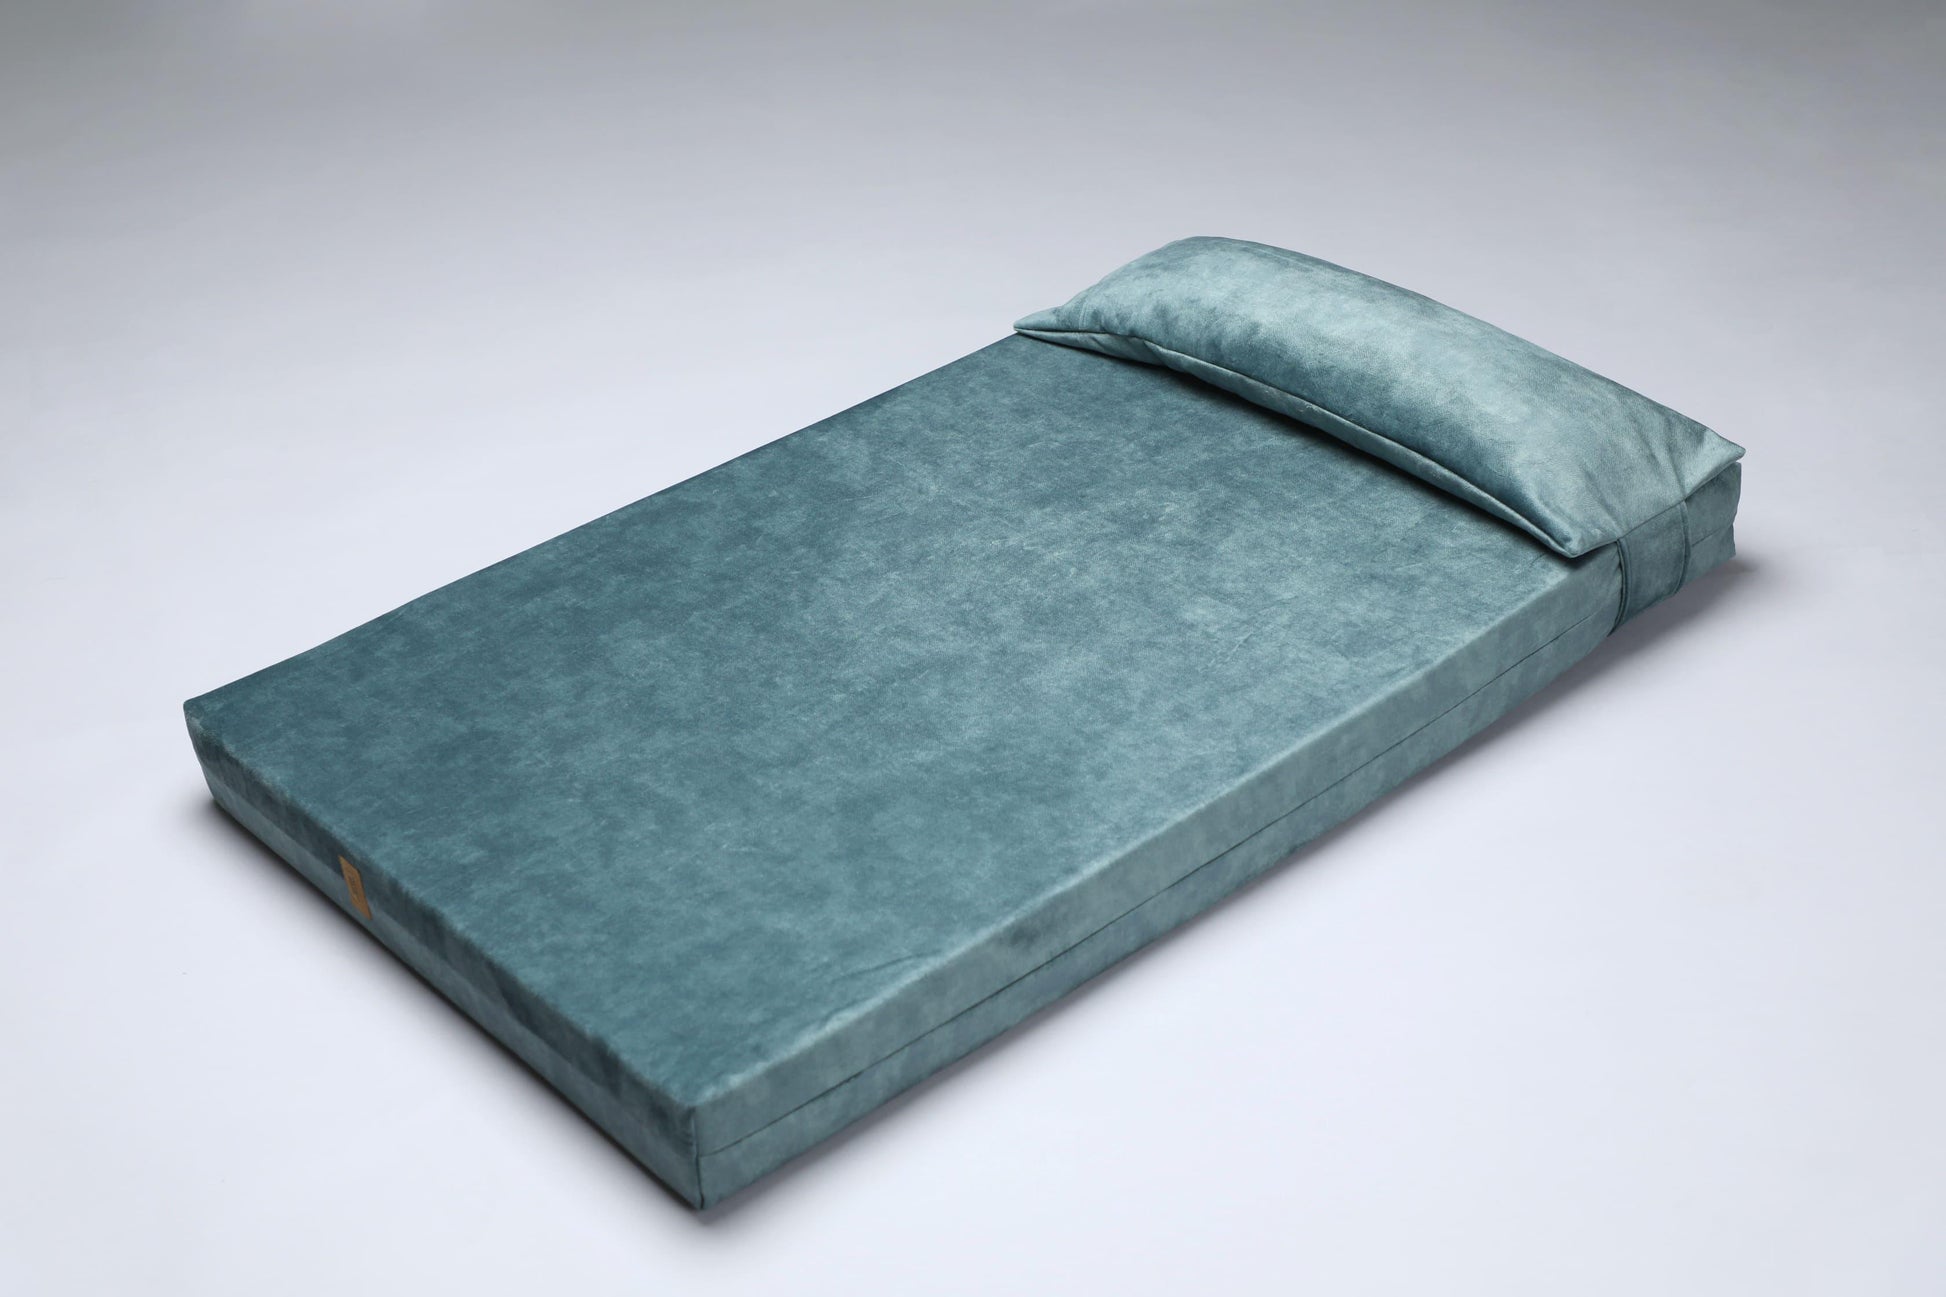 Dog bed for large dogs | Extra comfort & support | 2-sided | DUSTY GREEN - premium dog goods handmade in Europe by My Wild Other